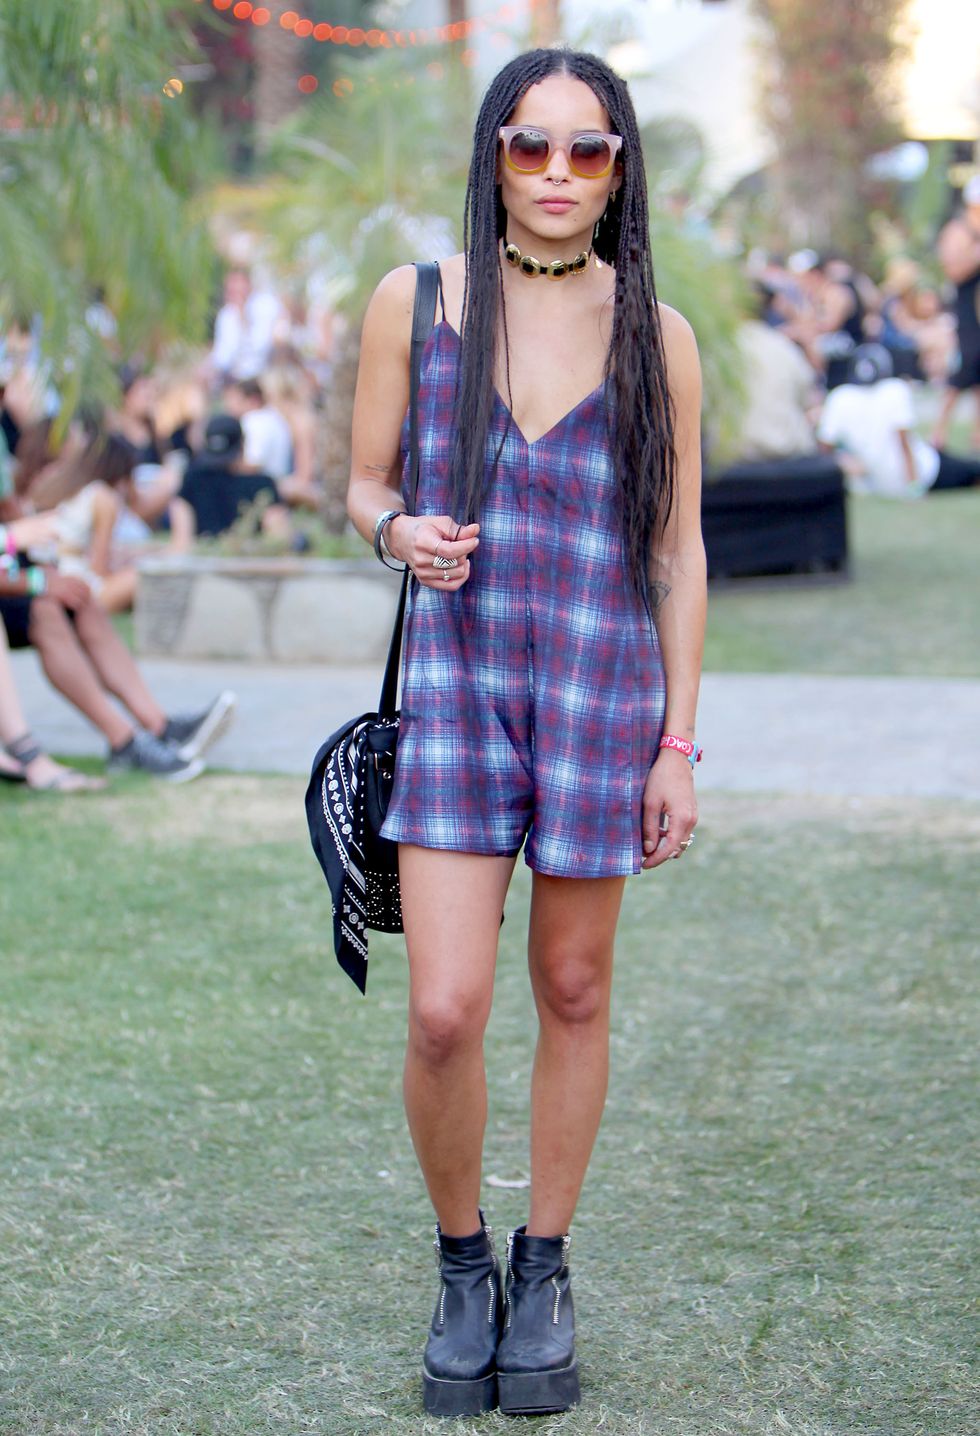 palm springs, ca april 11 zoe kravitz attends coachella wearing marc by marc jacobs sunglasses on april 11, 2015 in palm springs, california photo by rachel murraygetty images for marc by marc jacobs safilo